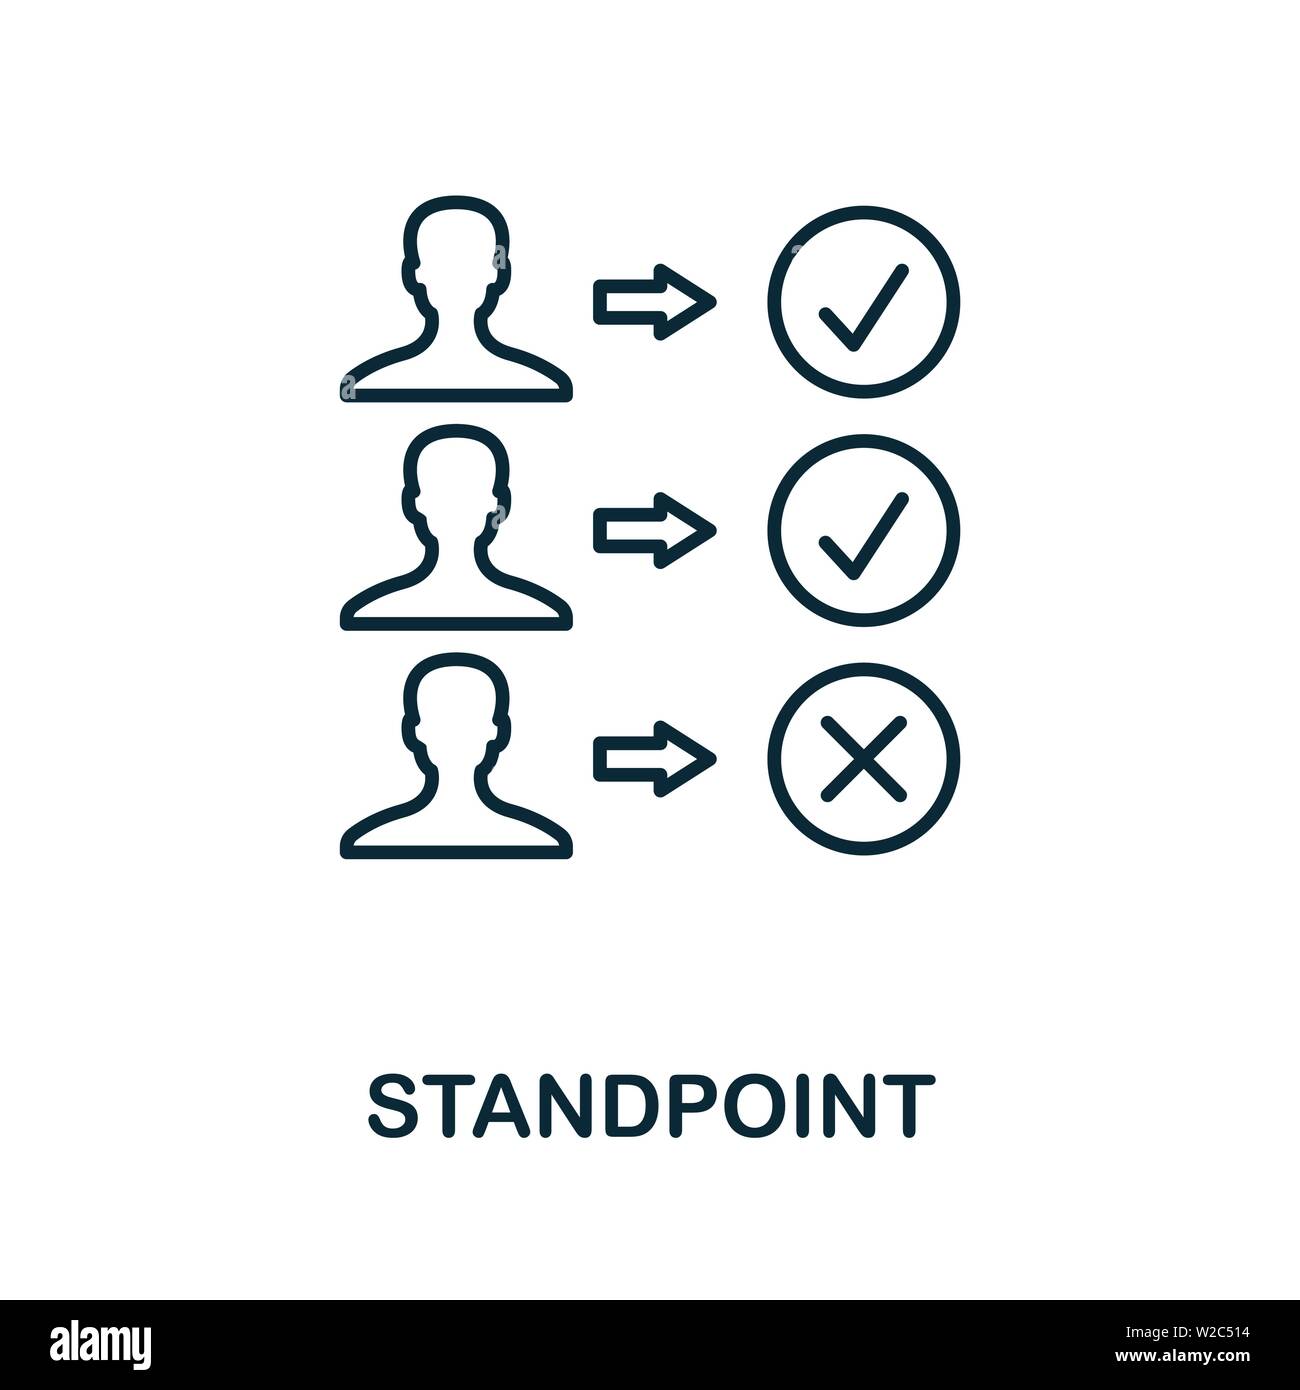 Standpoint outline icon. Thin line concept element from business management icons collection. Creative Standpoint icon for mobile apps and web usage Stock Vector